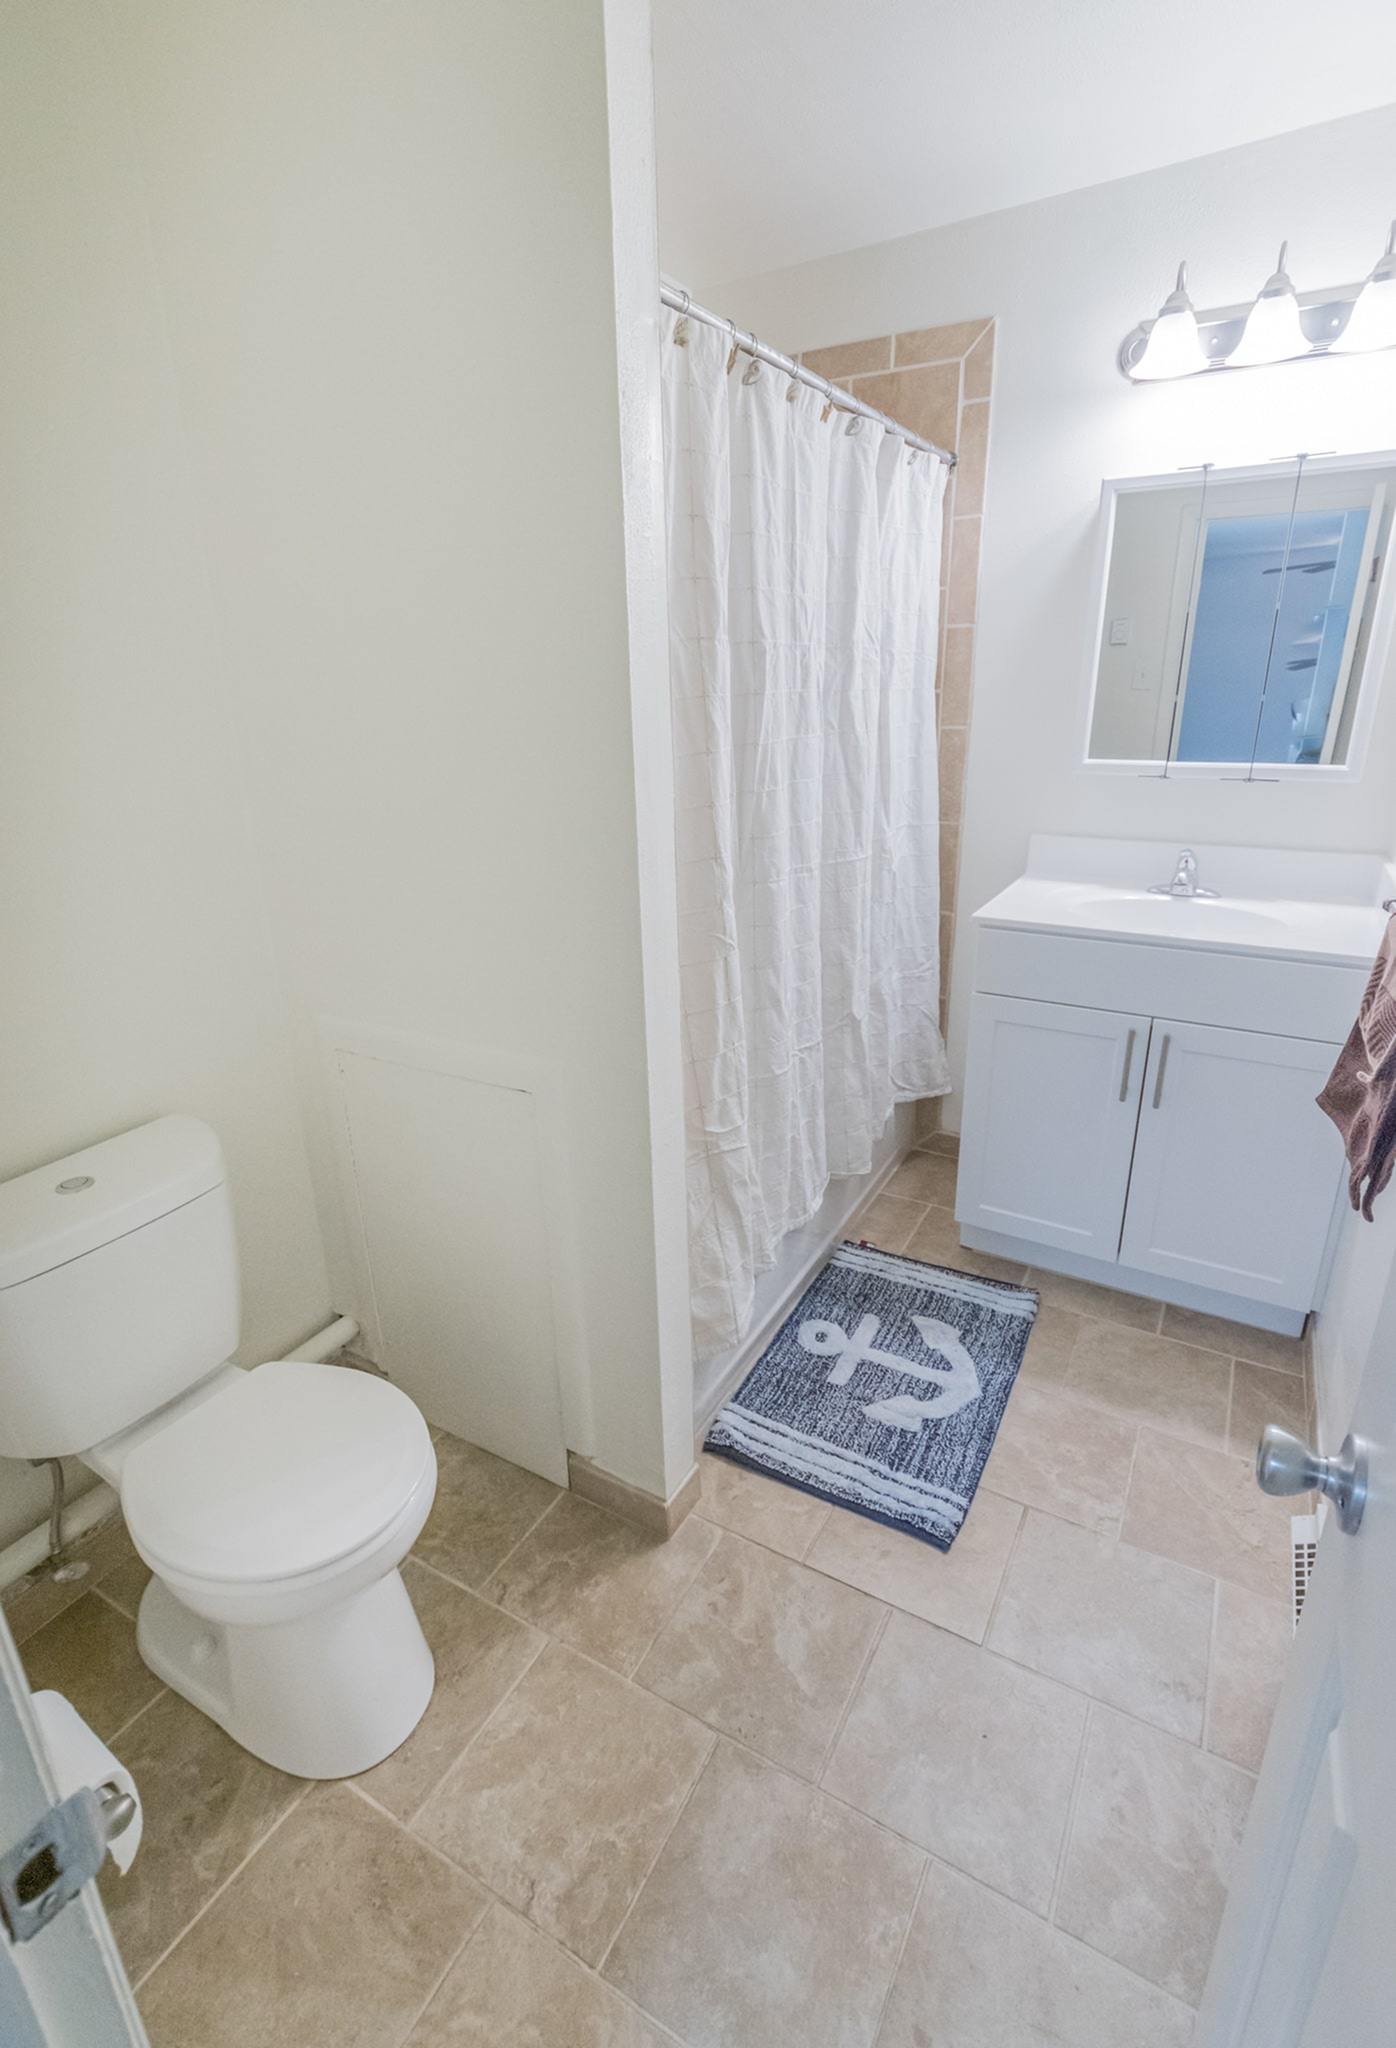 Bathroom with a toilet, sink, mirror, and beige tile flooring.